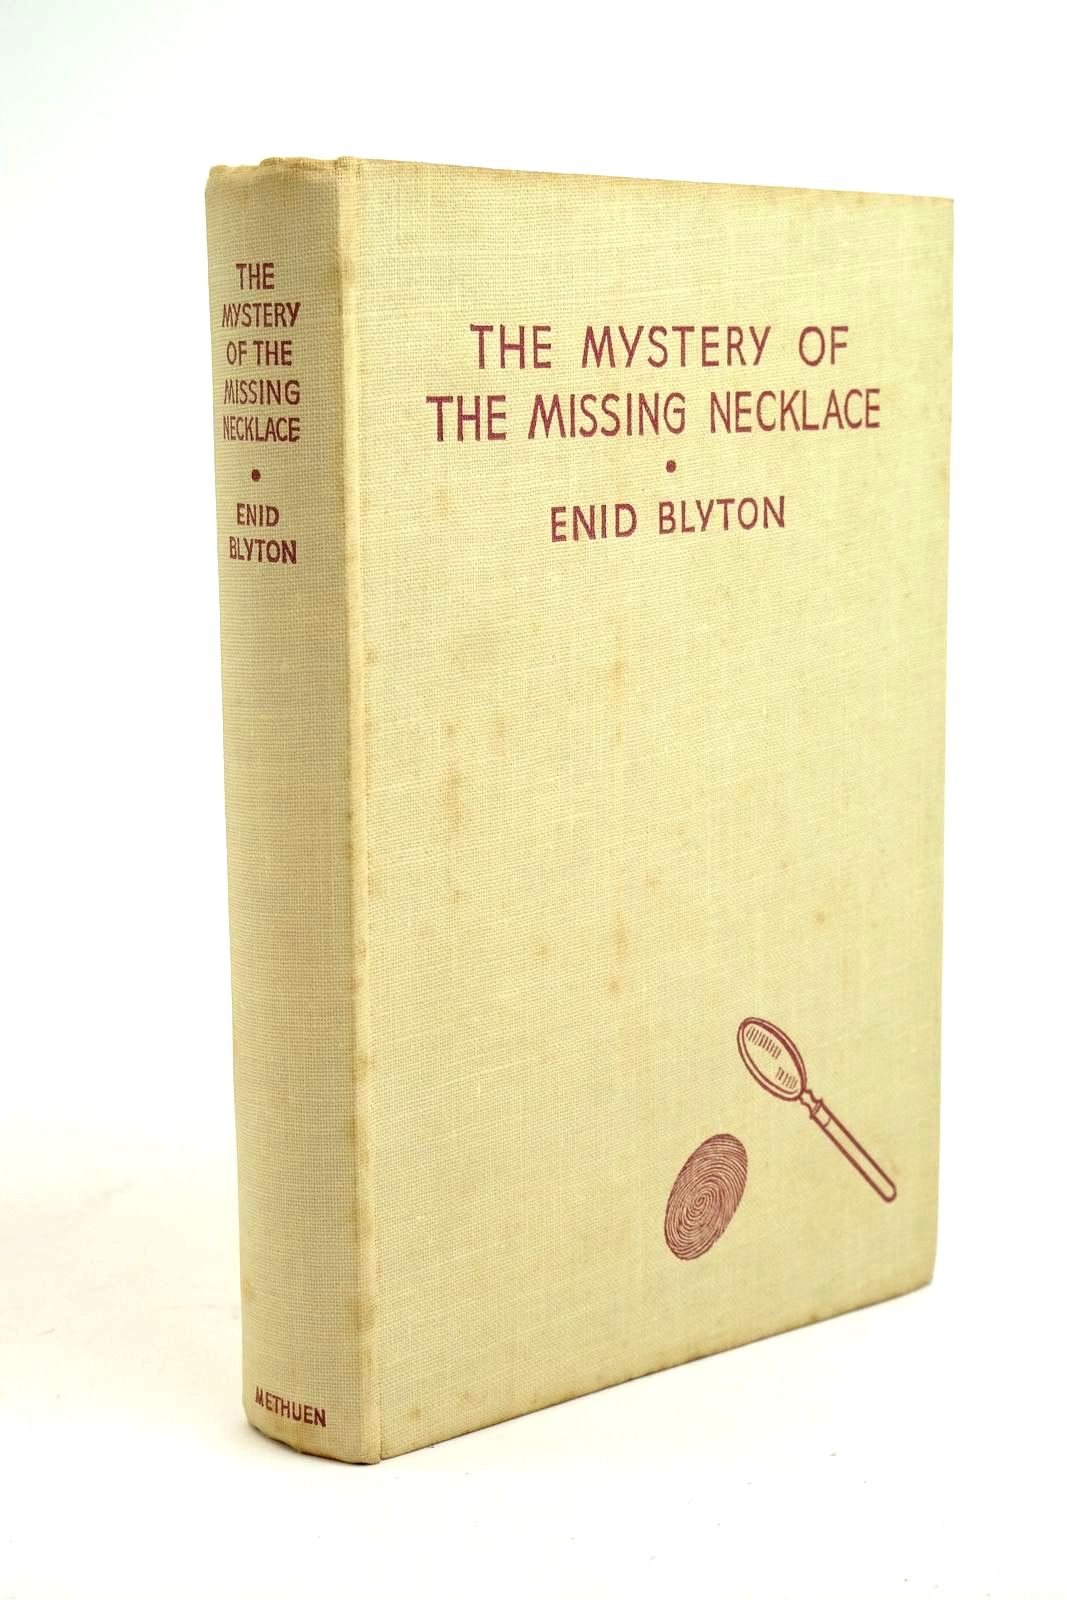 Photo of THE MYSTERY OF THE MISSING NECKLACE written by Blyton, Enid illustrated by Abbey, J. published by Methuen & Co. Ltd. (STOCK CODE: 1321814)  for sale by Stella & Rose's Books